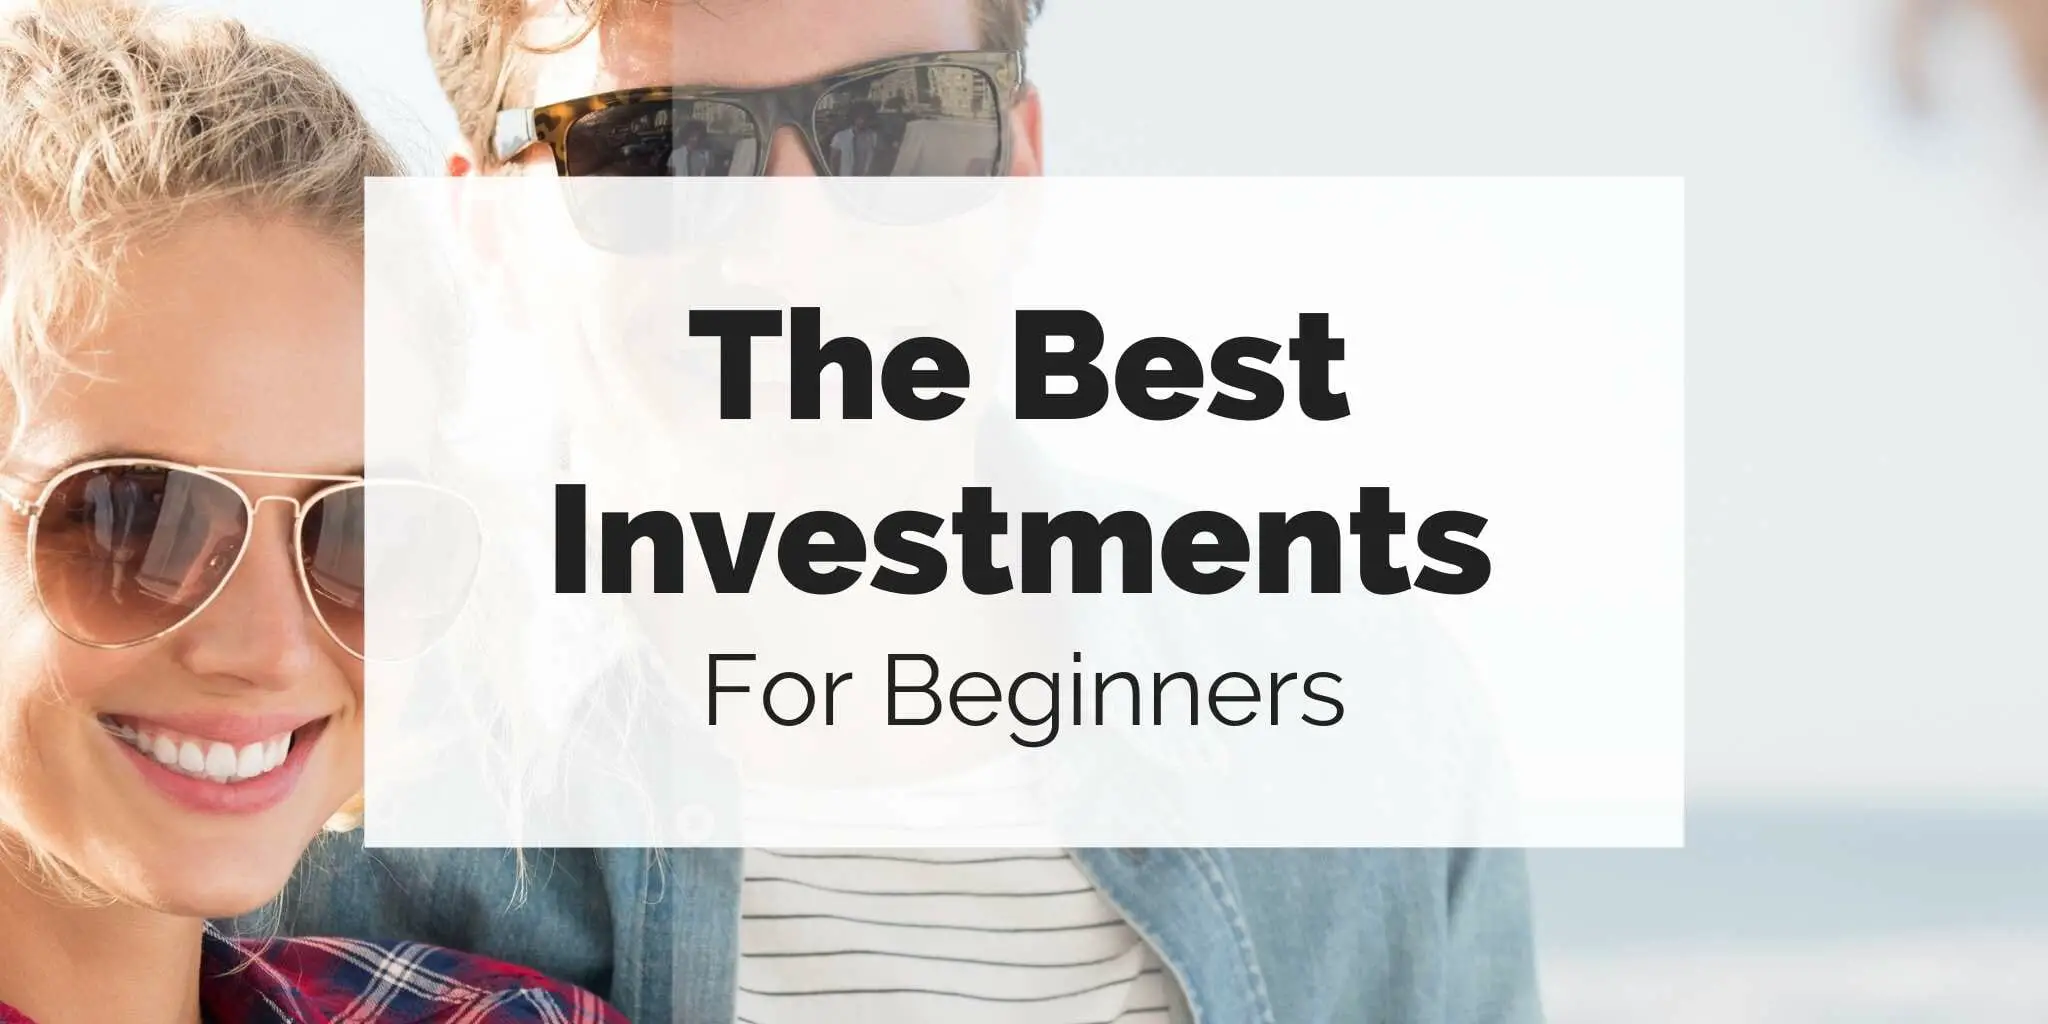 What are the Best Investment Options for Beginners?